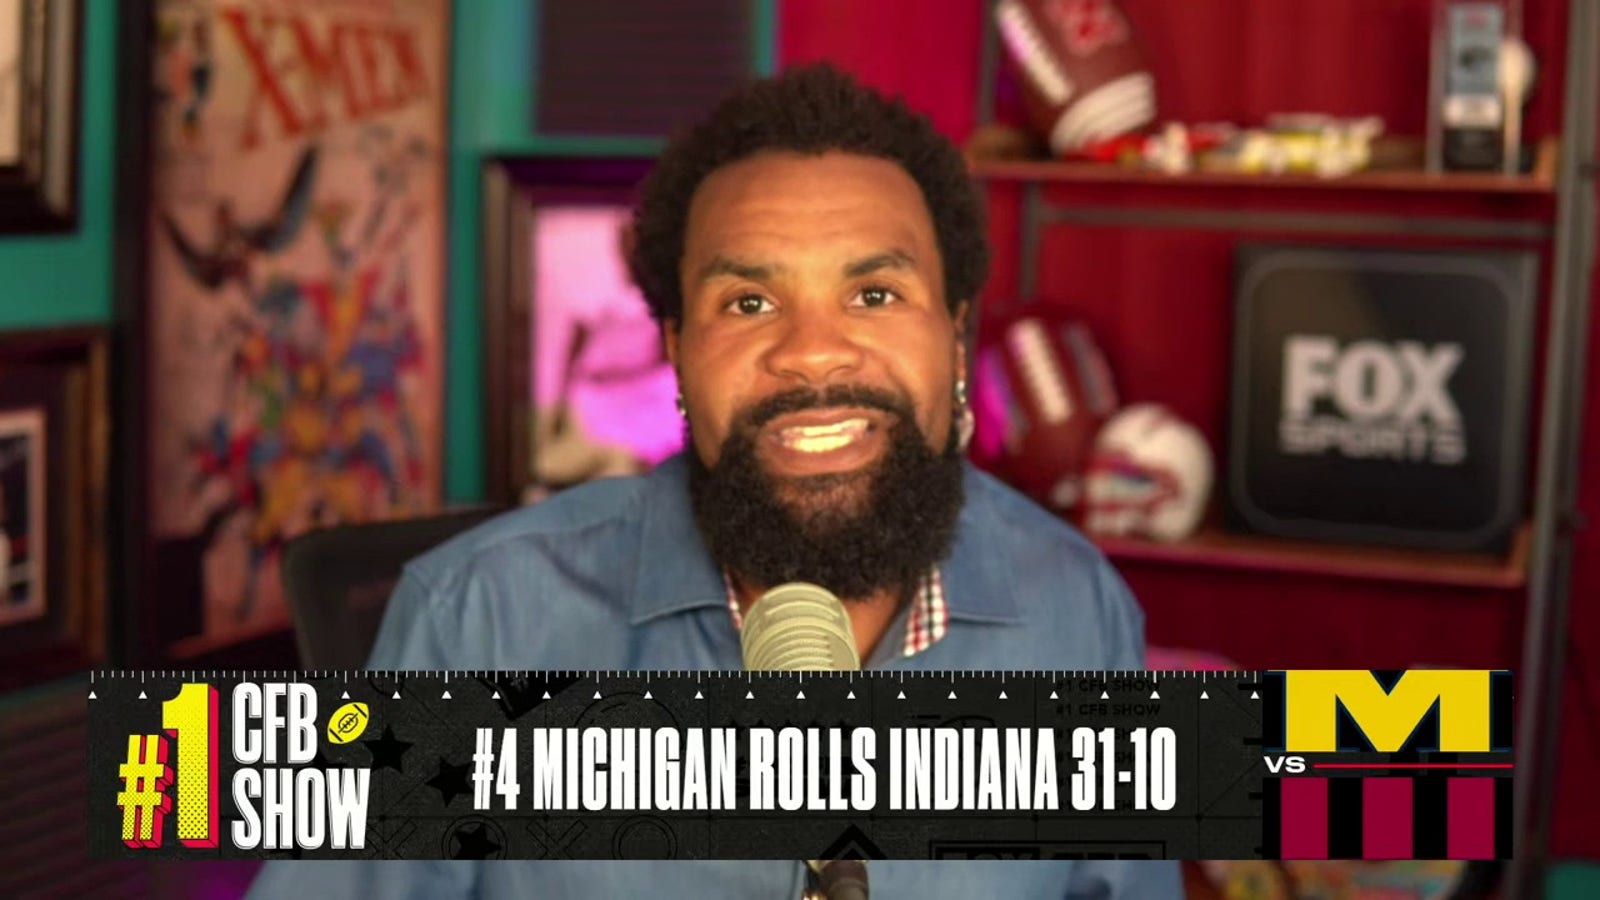 Michigan looks dominant in 31-10 win over Indiana | The Number One College Football Show